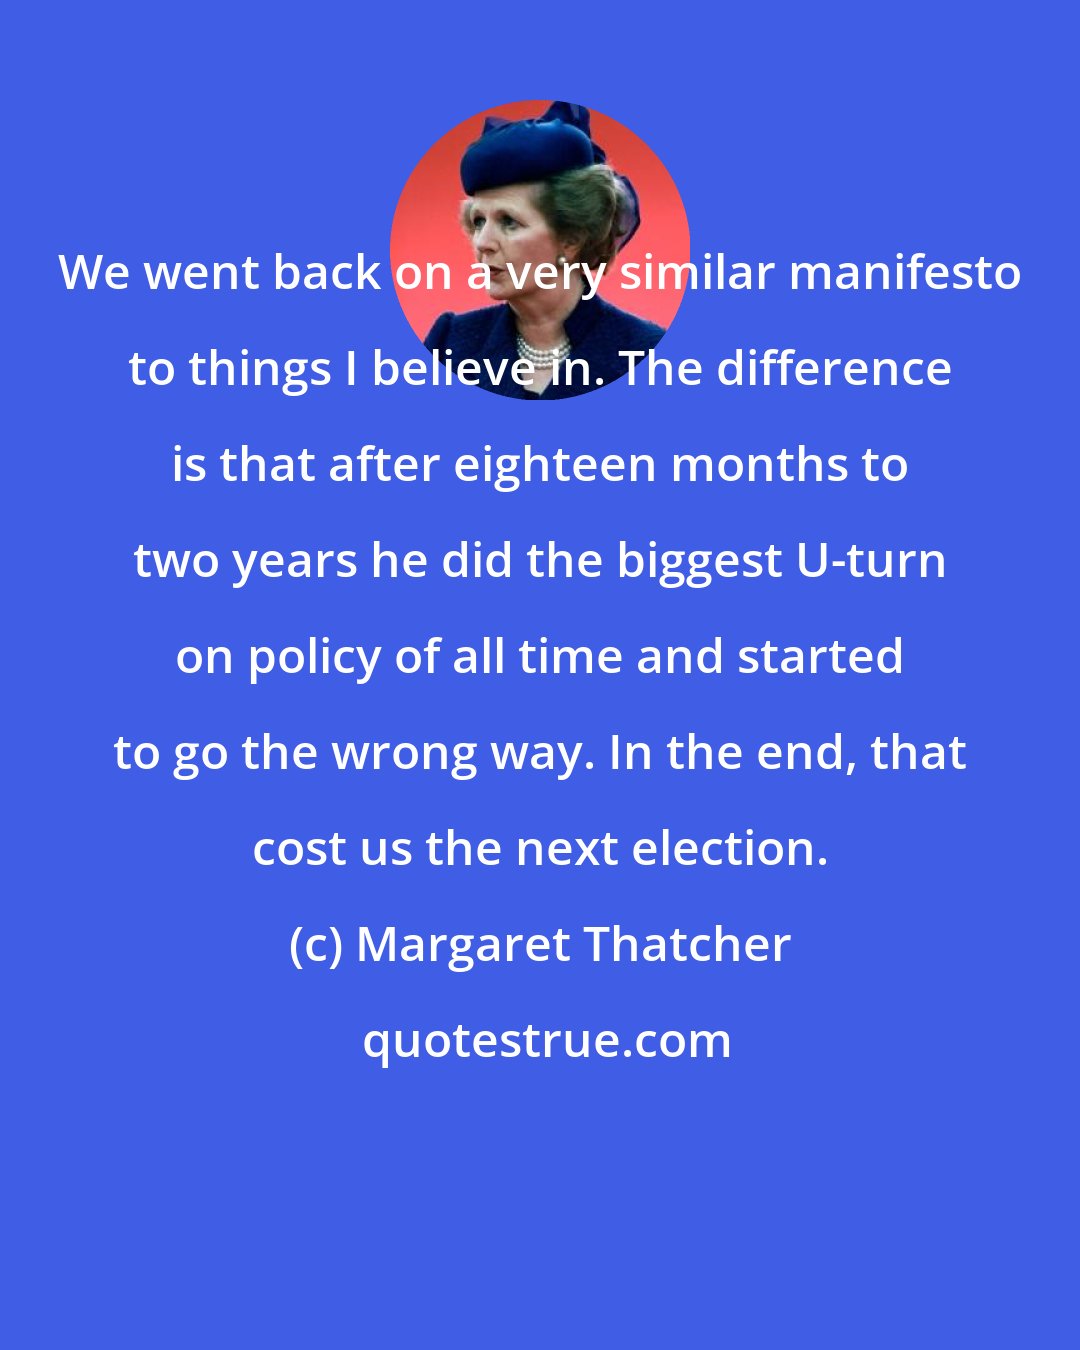 Margaret Thatcher: We went back on a very similar manifesto to things I believe in. The difference is that after eighteen months to two years he did the biggest U-turn on policy of all time and started to go the wrong way. In the end, that cost us the next election.